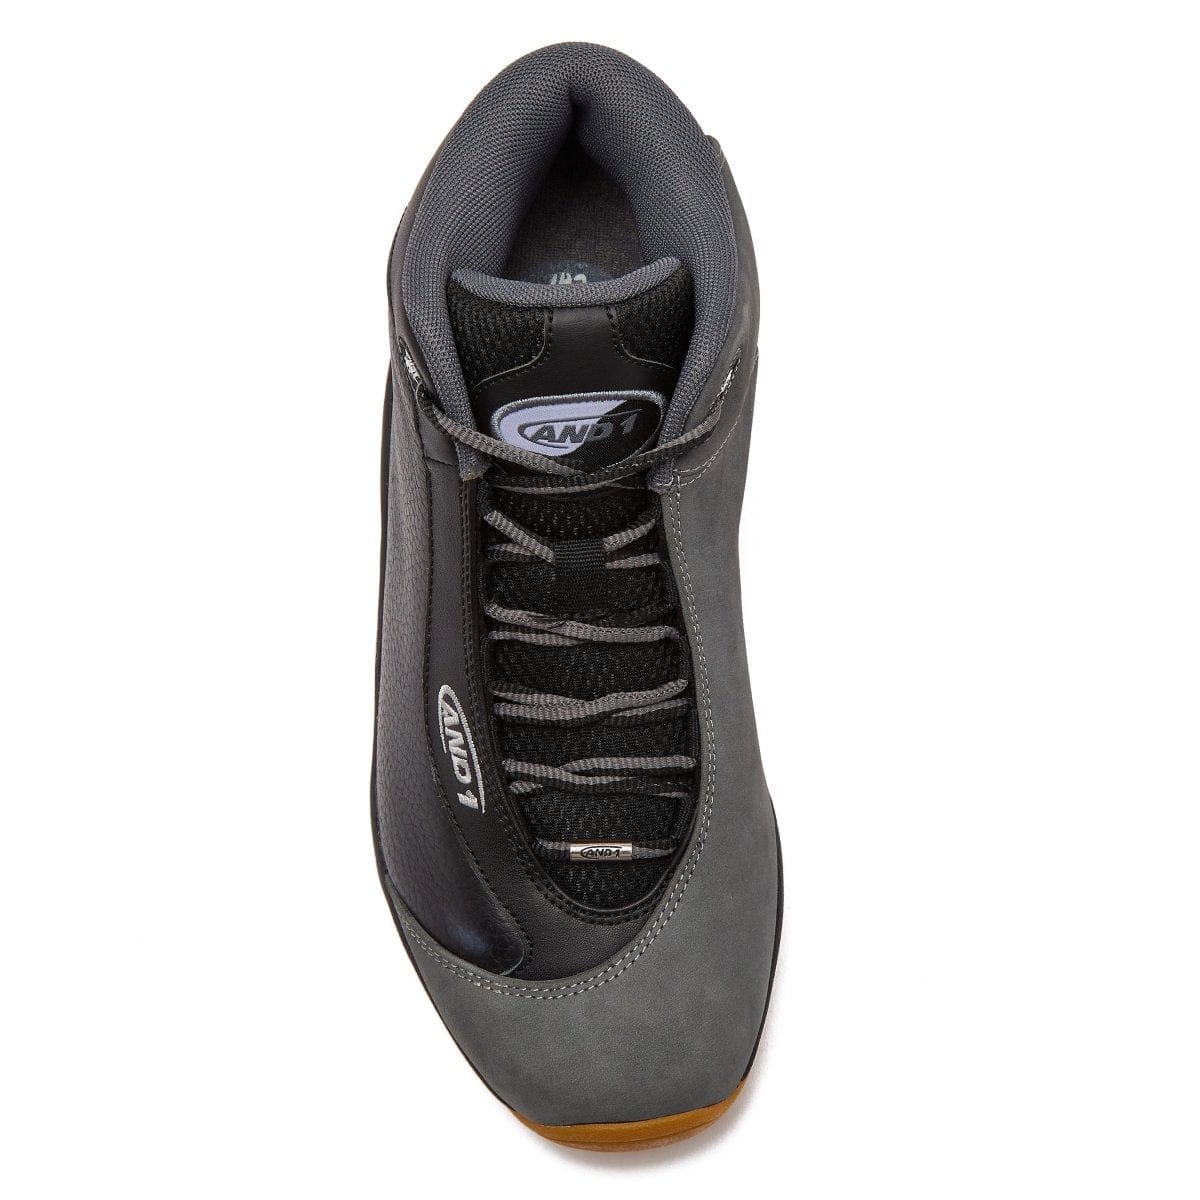 AND-1 AND-1 MEN'S TAI CHI BLACK BASKETBALL SHOES - INSPORT